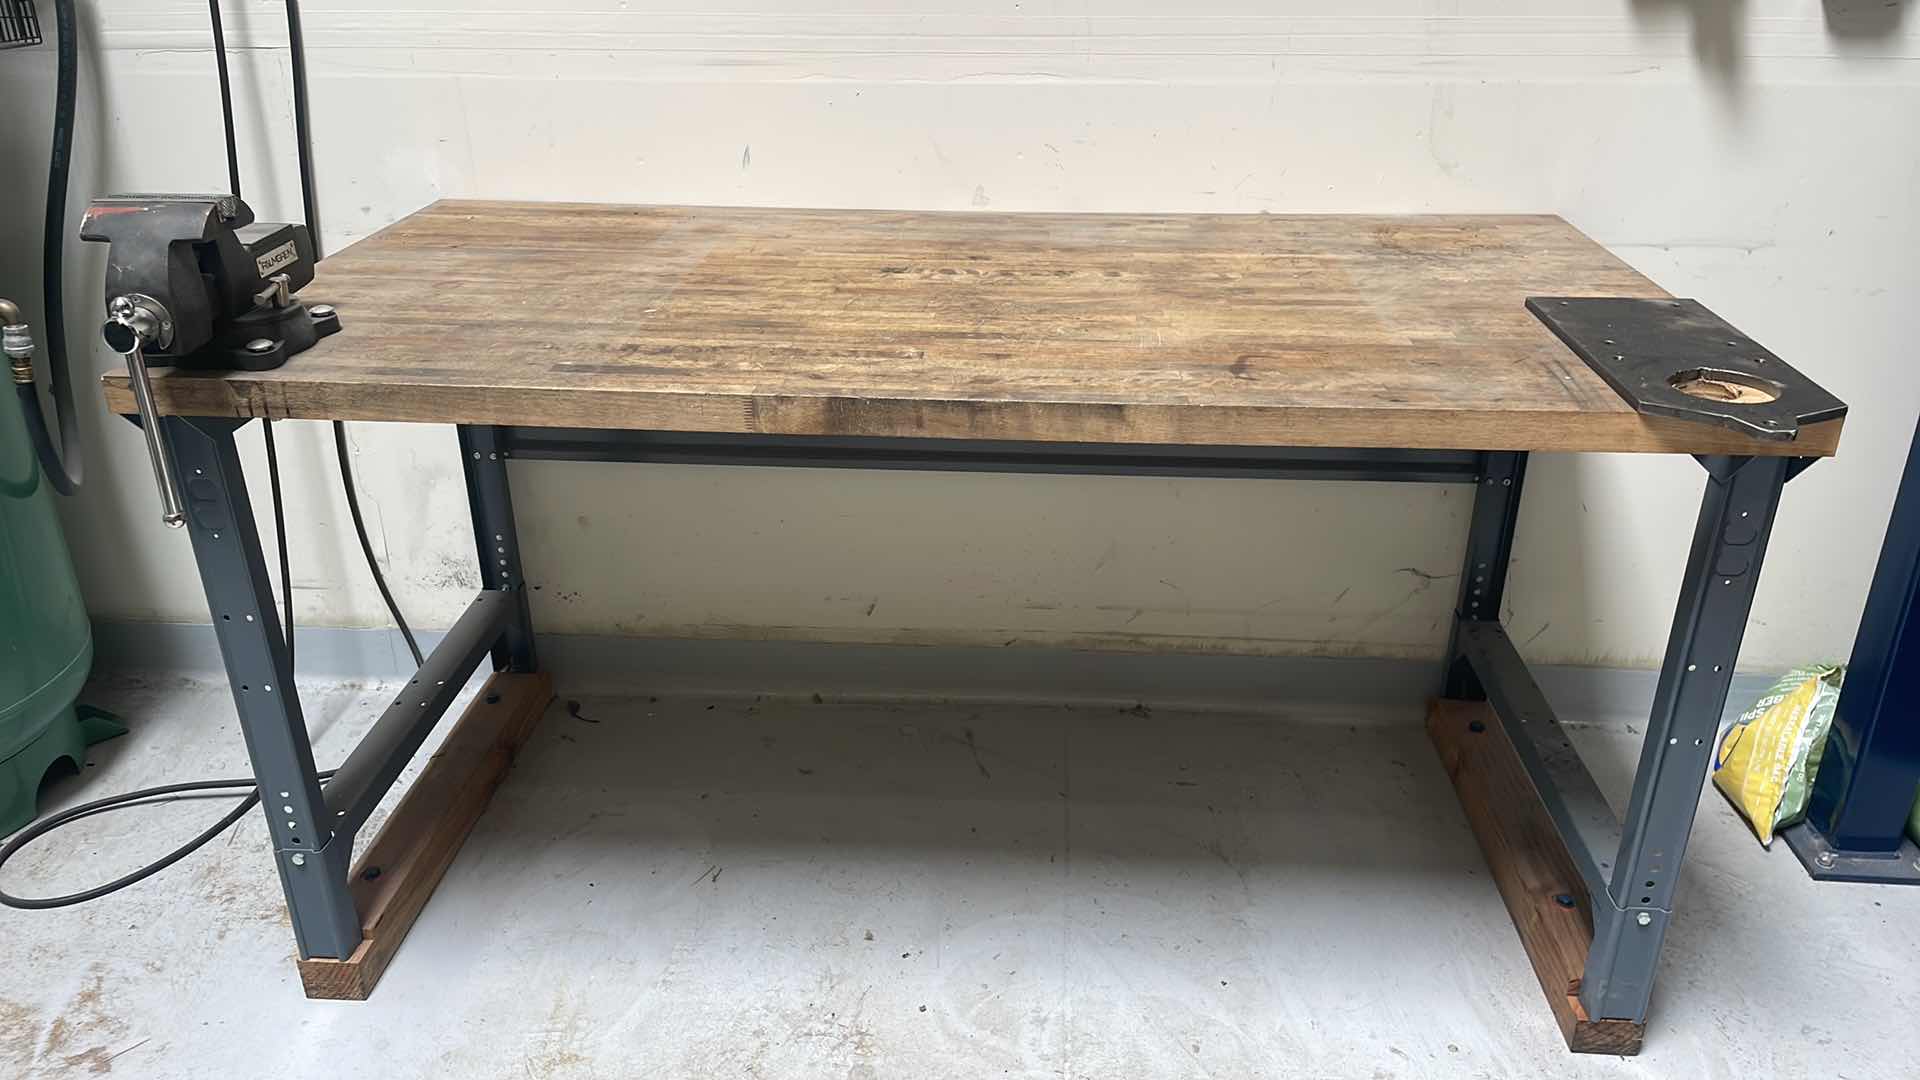 Photo 1 of WORK BENCH 72” x 36” WITH PALMGREN 5” VISE